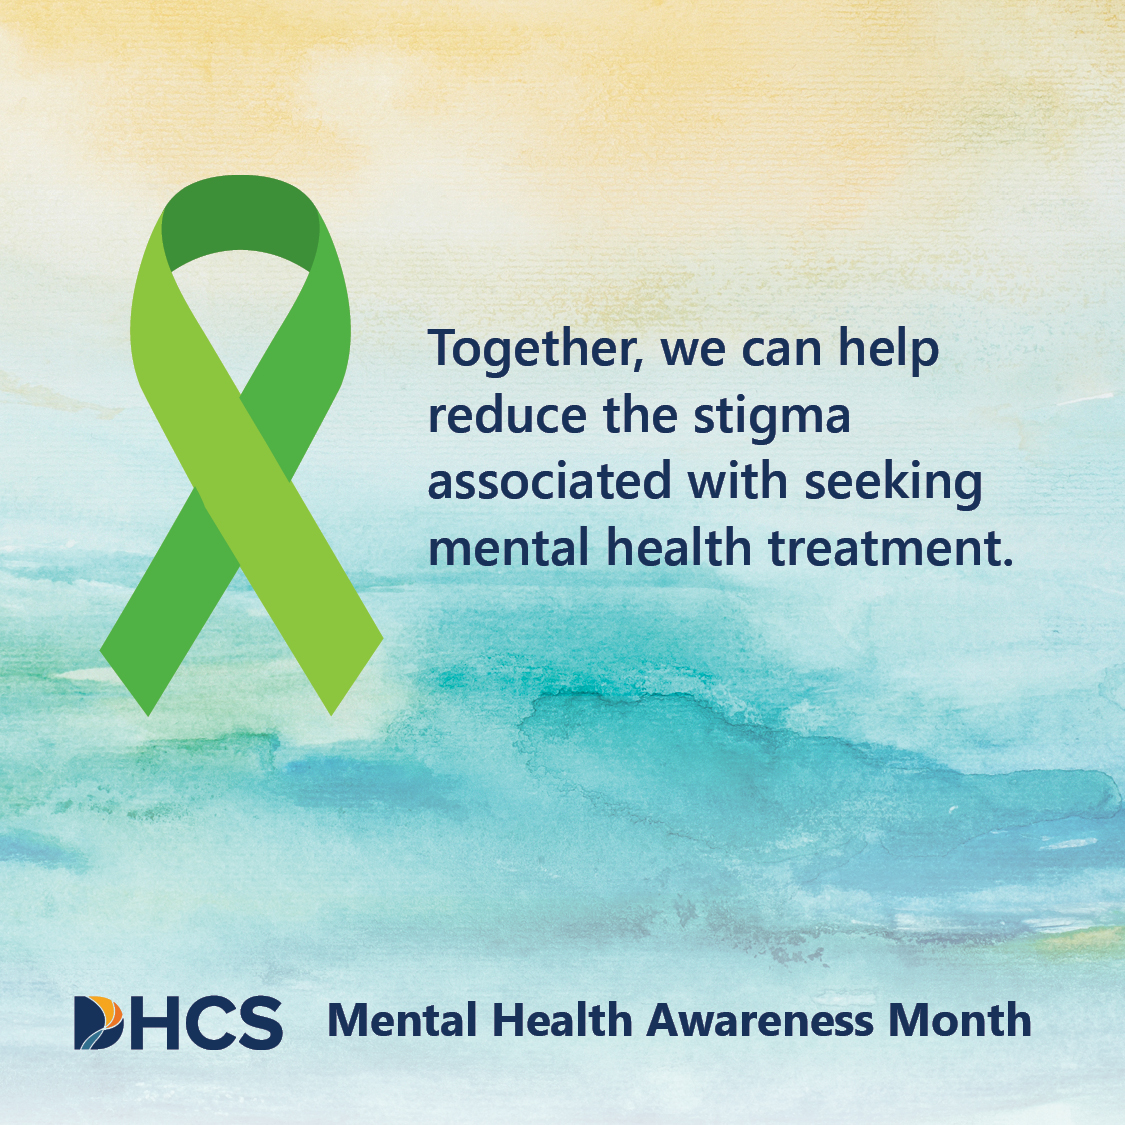 May is Mental Health Awareness Month (MHAM). Show your support by wearing lime green during May. Together, we can help reduce the stigma associated with seeking mental health treatment. Learn more: ow.ly/Pl8x50RvYHv #MHAM #Together4MH